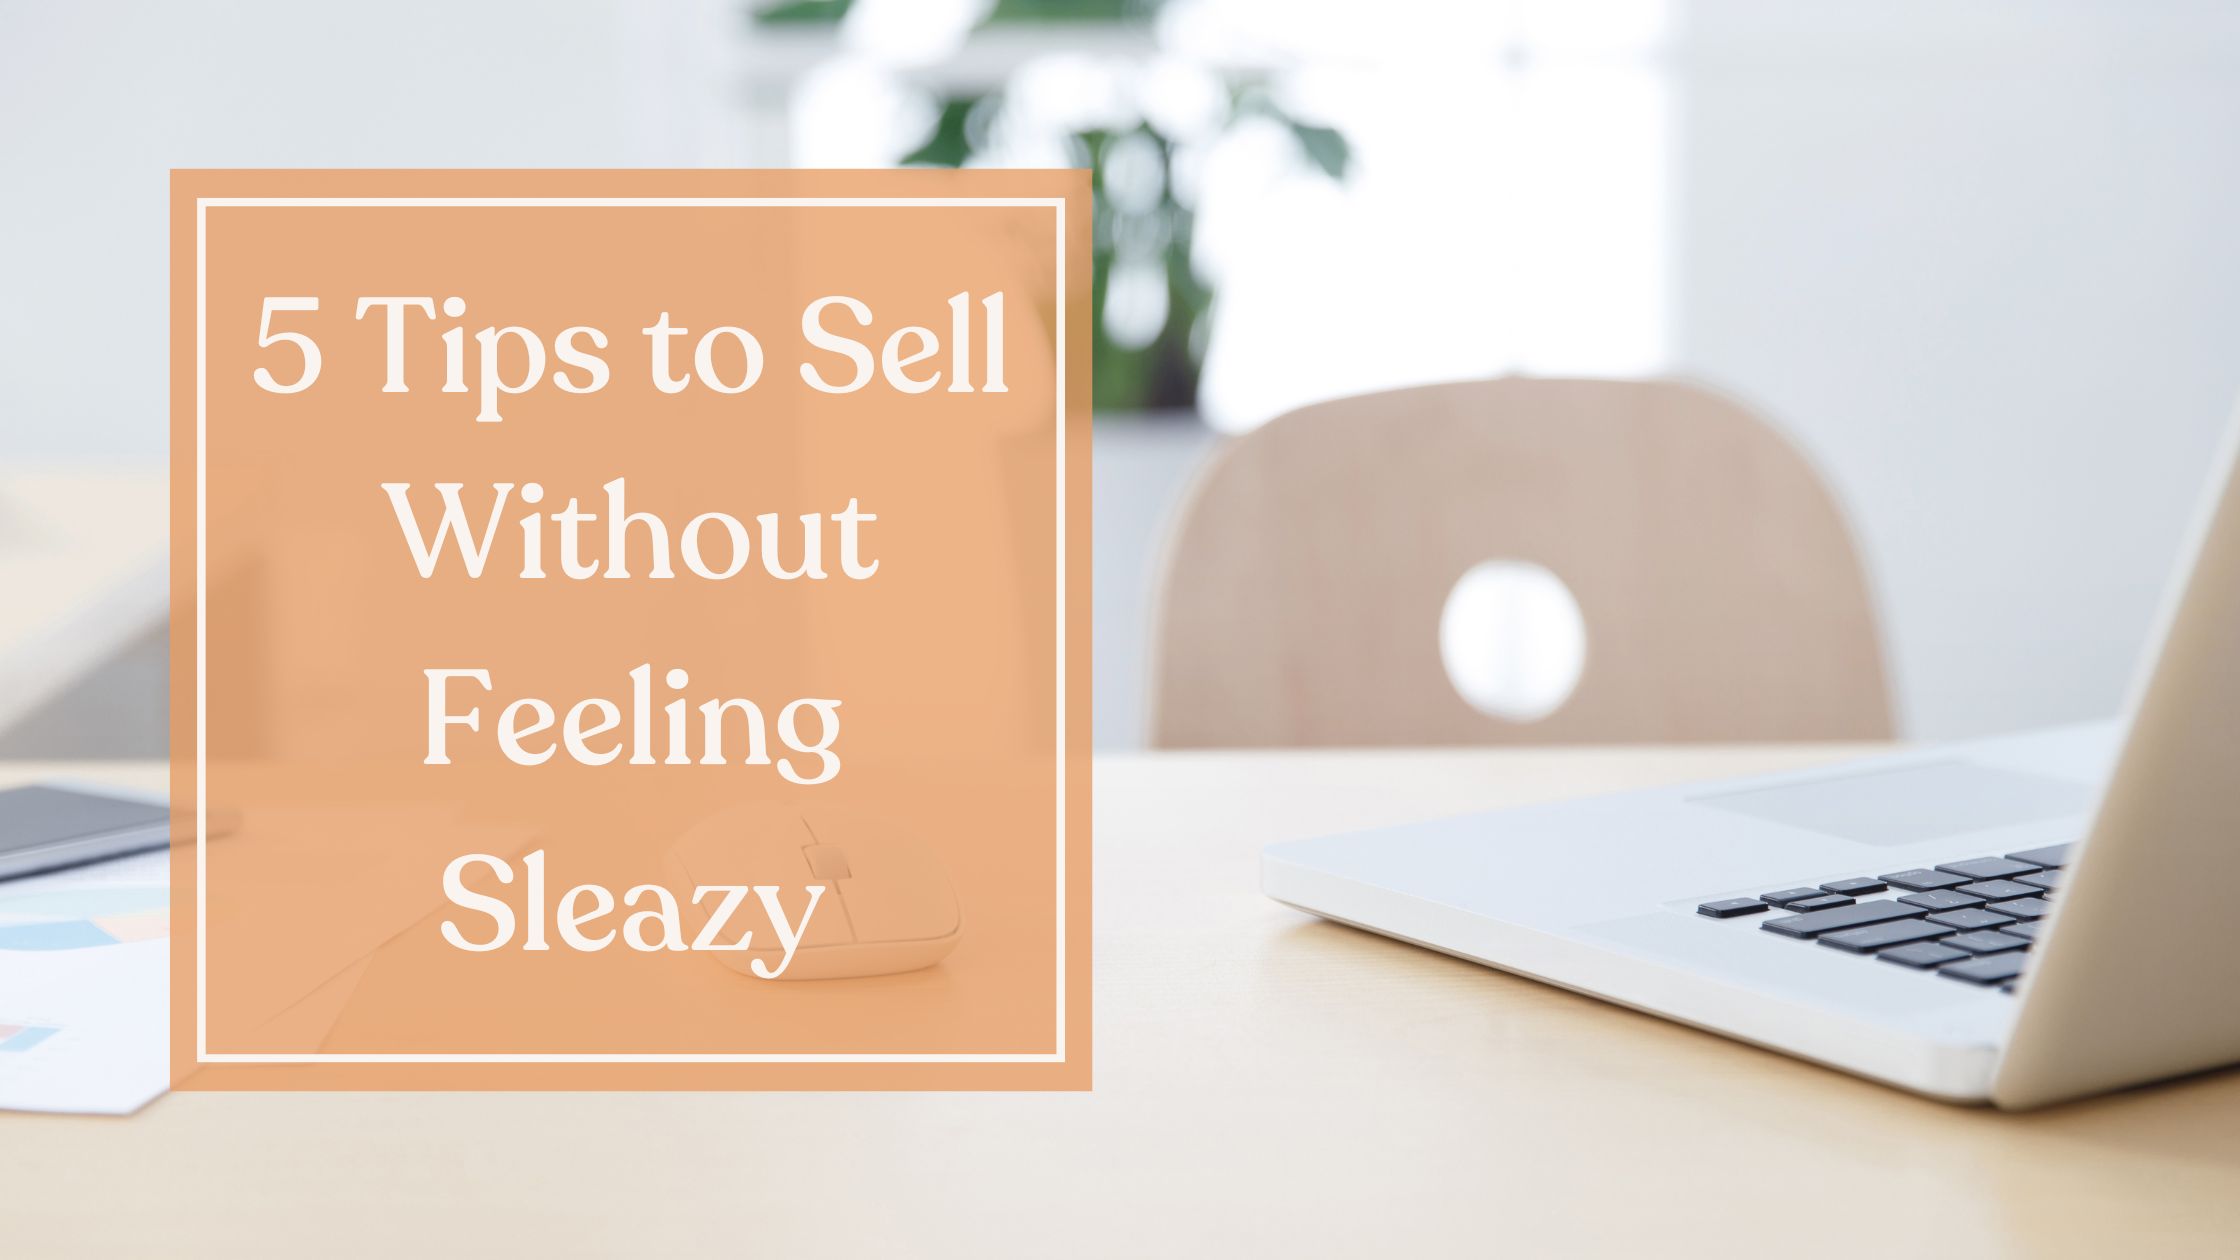 5 Tips to Sell Without Feeling Sleazy